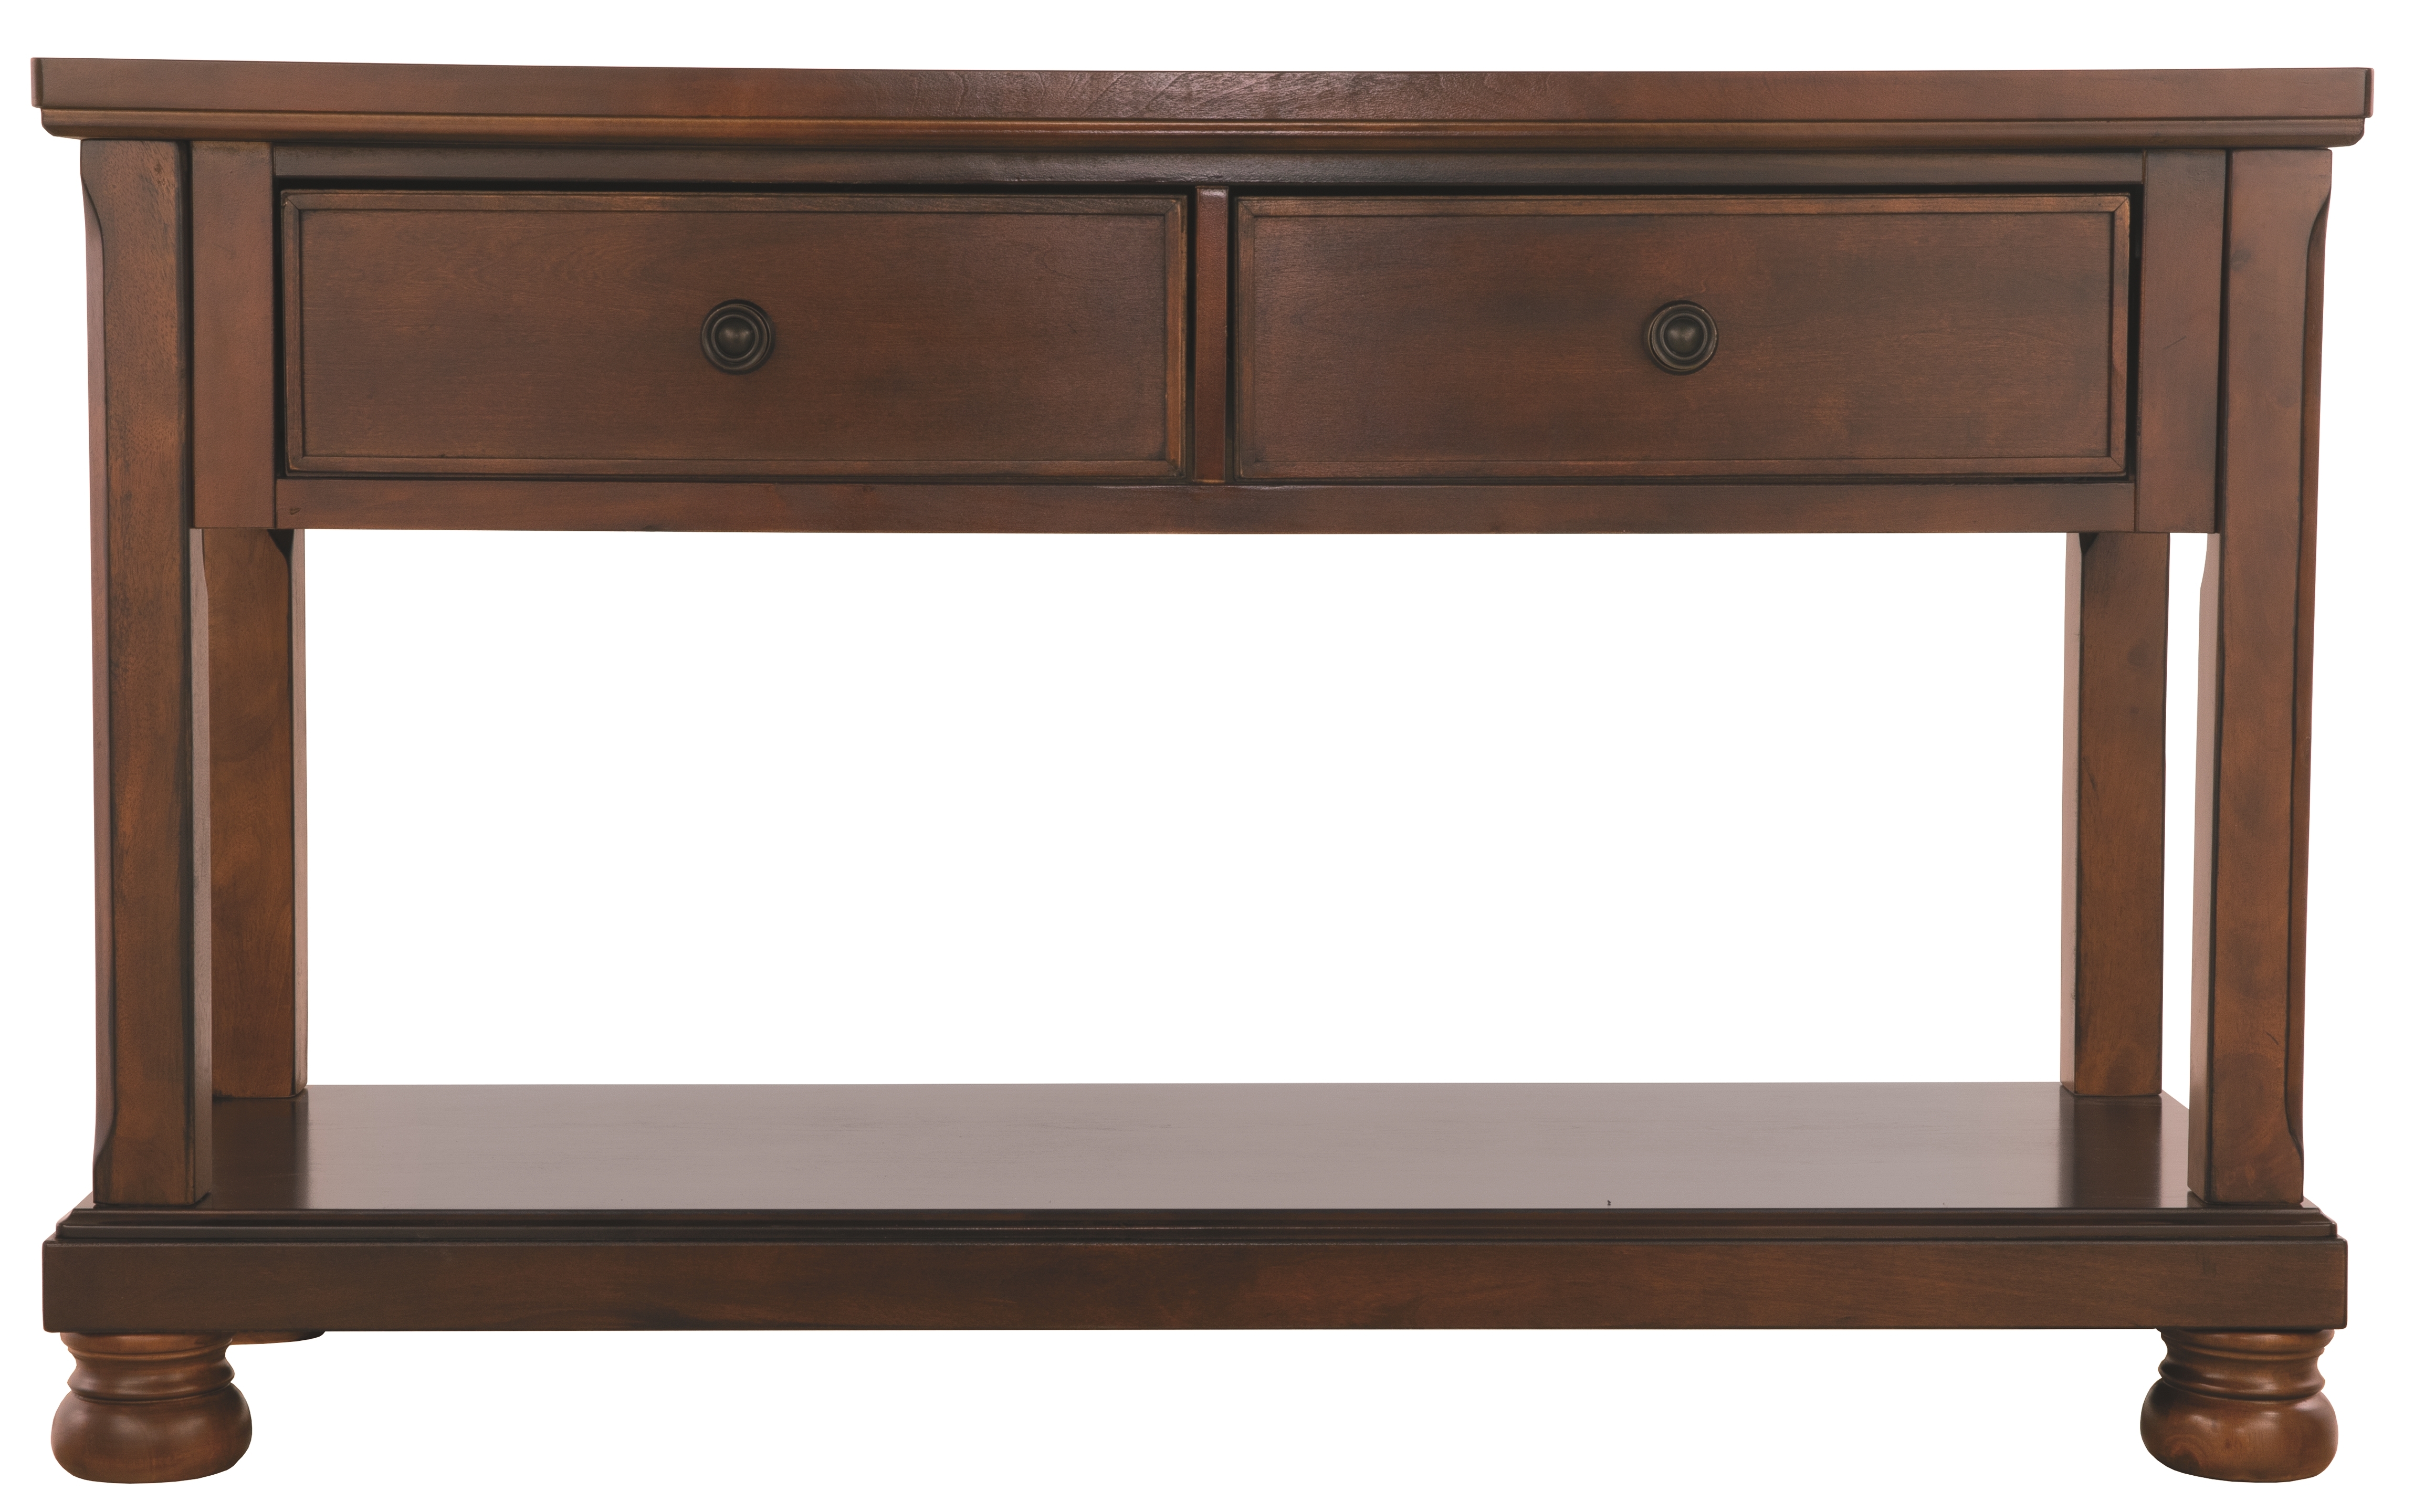 Wooden Console Table With Bun Feet And Storage Space, Brown- Saltoro Sherpi